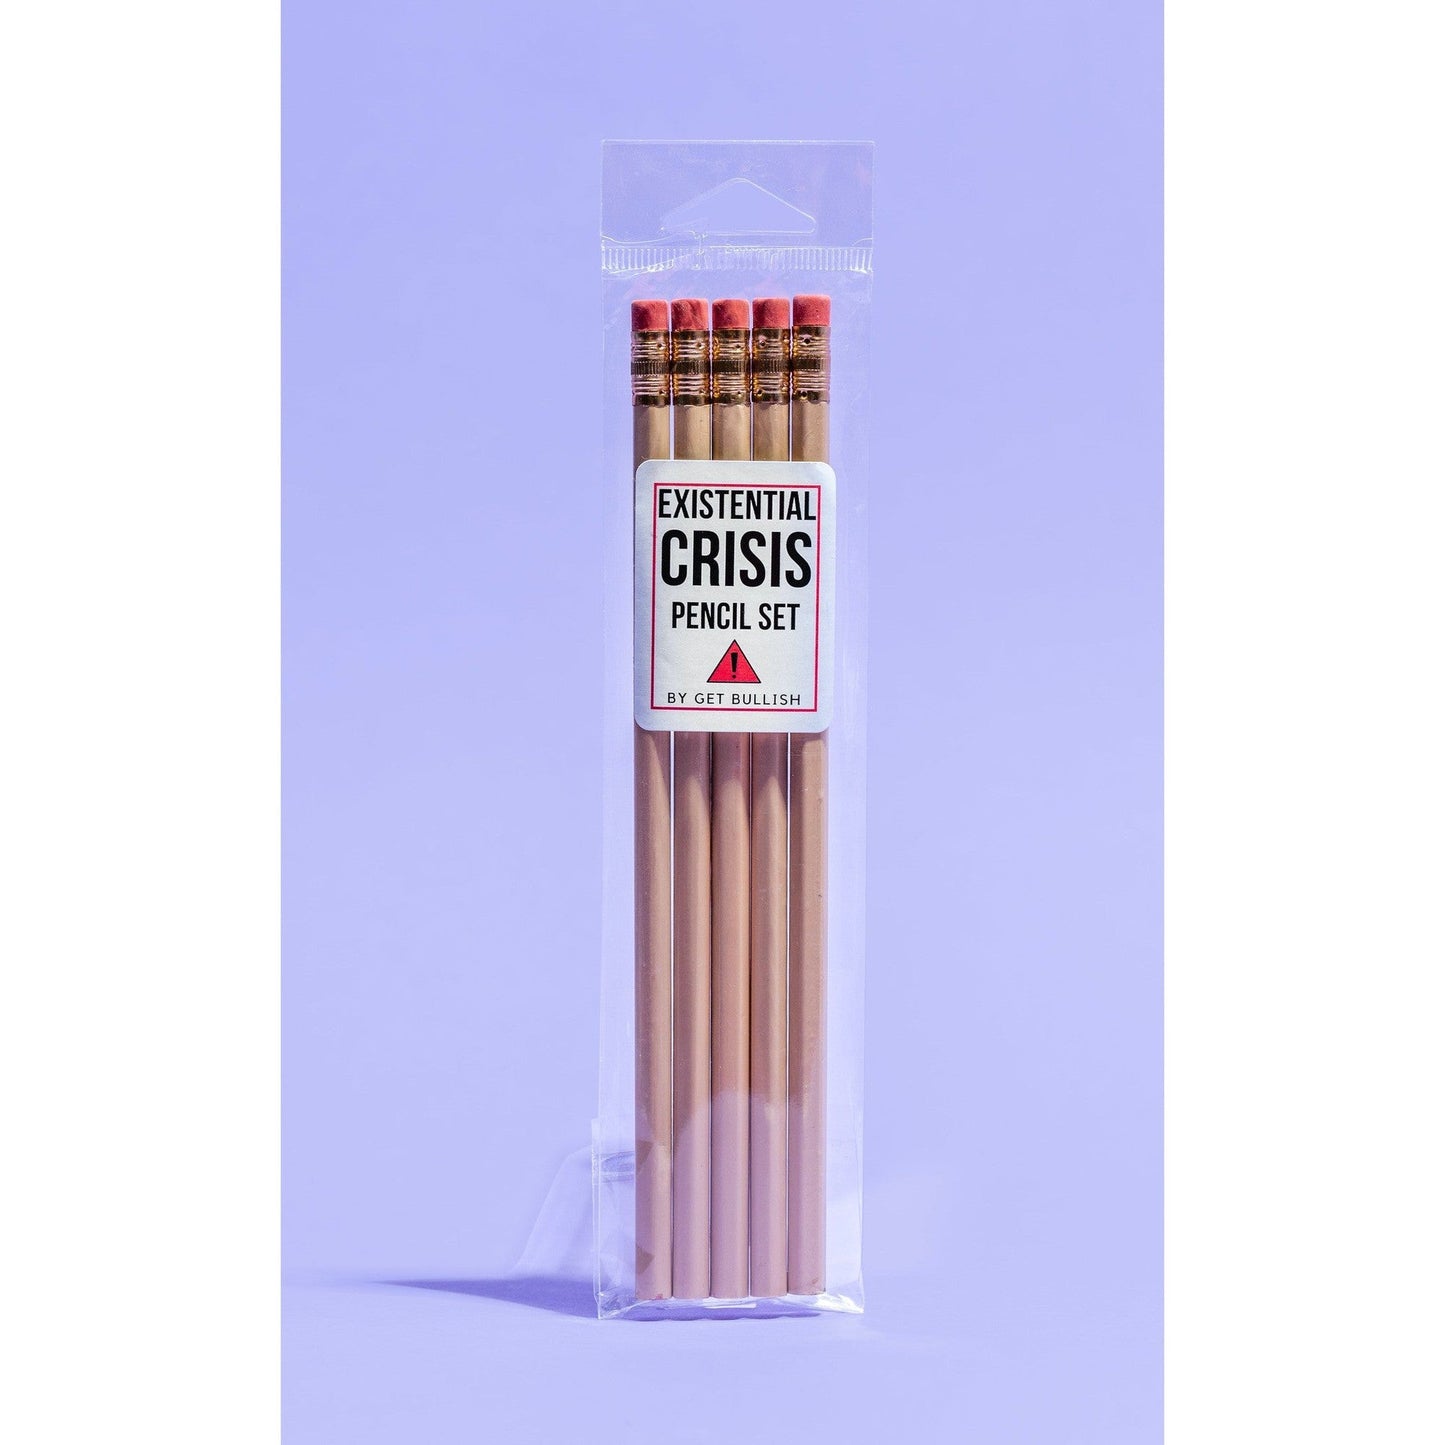 EXISTENTIAL CRISIS Pencil Set | 5 Cedar Pencils | Cream with Blood-Red Foil Stamping